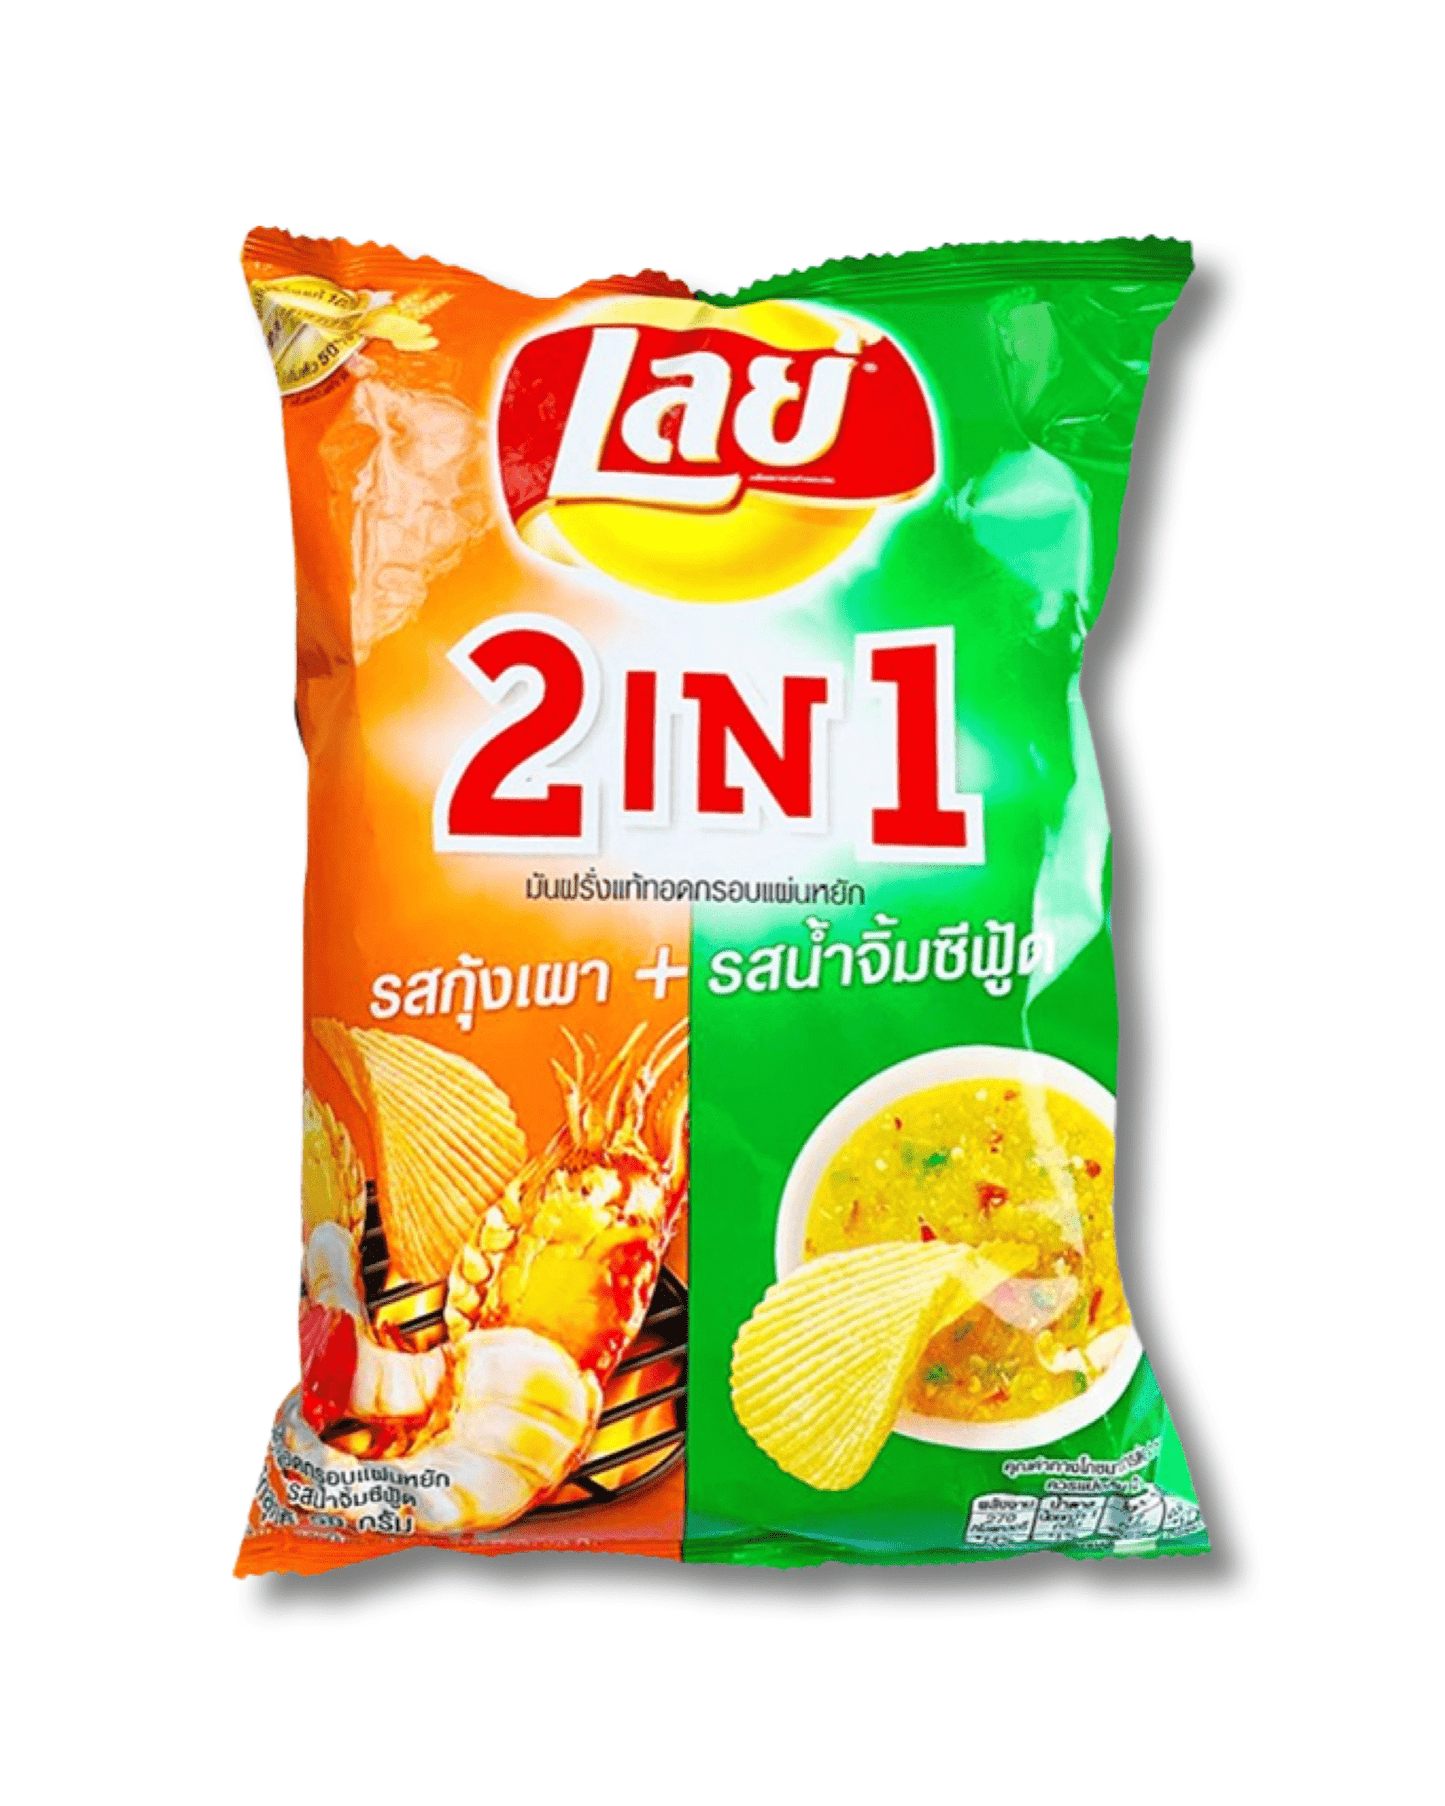 Lays 2-in-1 Seafood Sauce (Thailand) - Exotic Soda Company